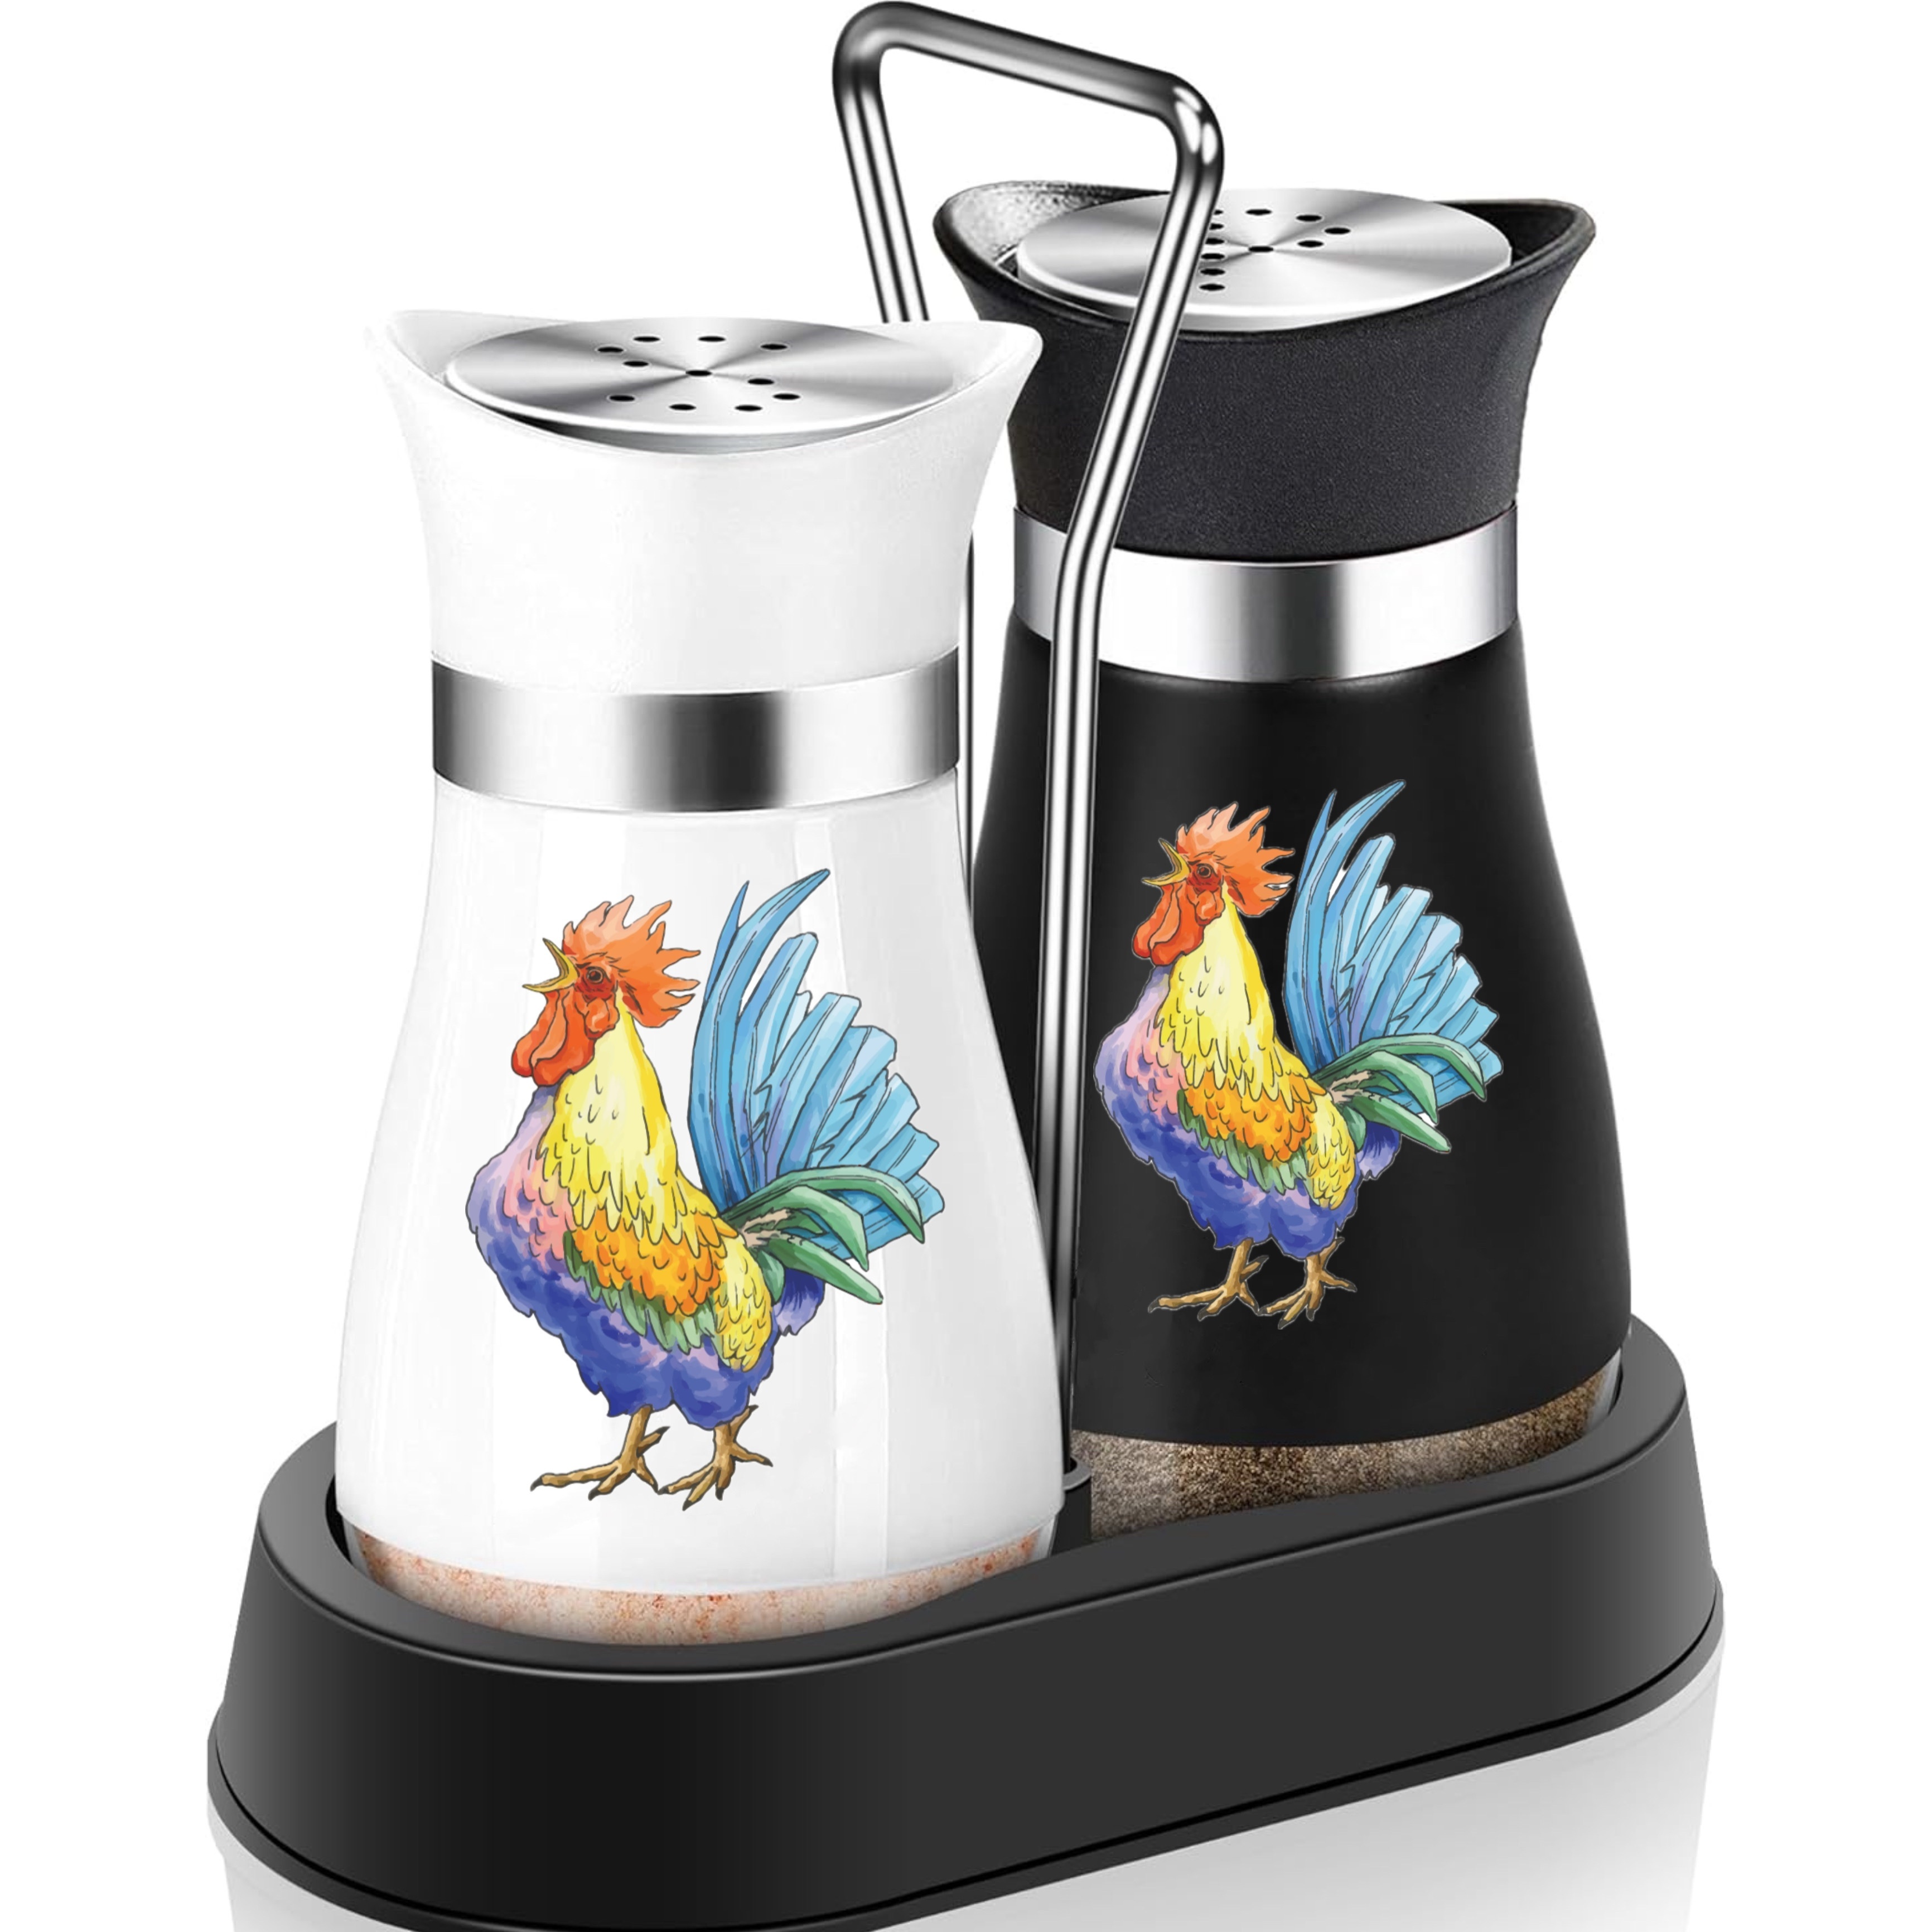 

Rooster Pattern Stainless Steel And Glass Salt & Pepper Shaker Set With Holder - 4 Oz Refillable Seasoning Dispensers For Kitchen Decor, Farmhouse Housewarming Gifts, Dining, Rvs, Camping, Bbq